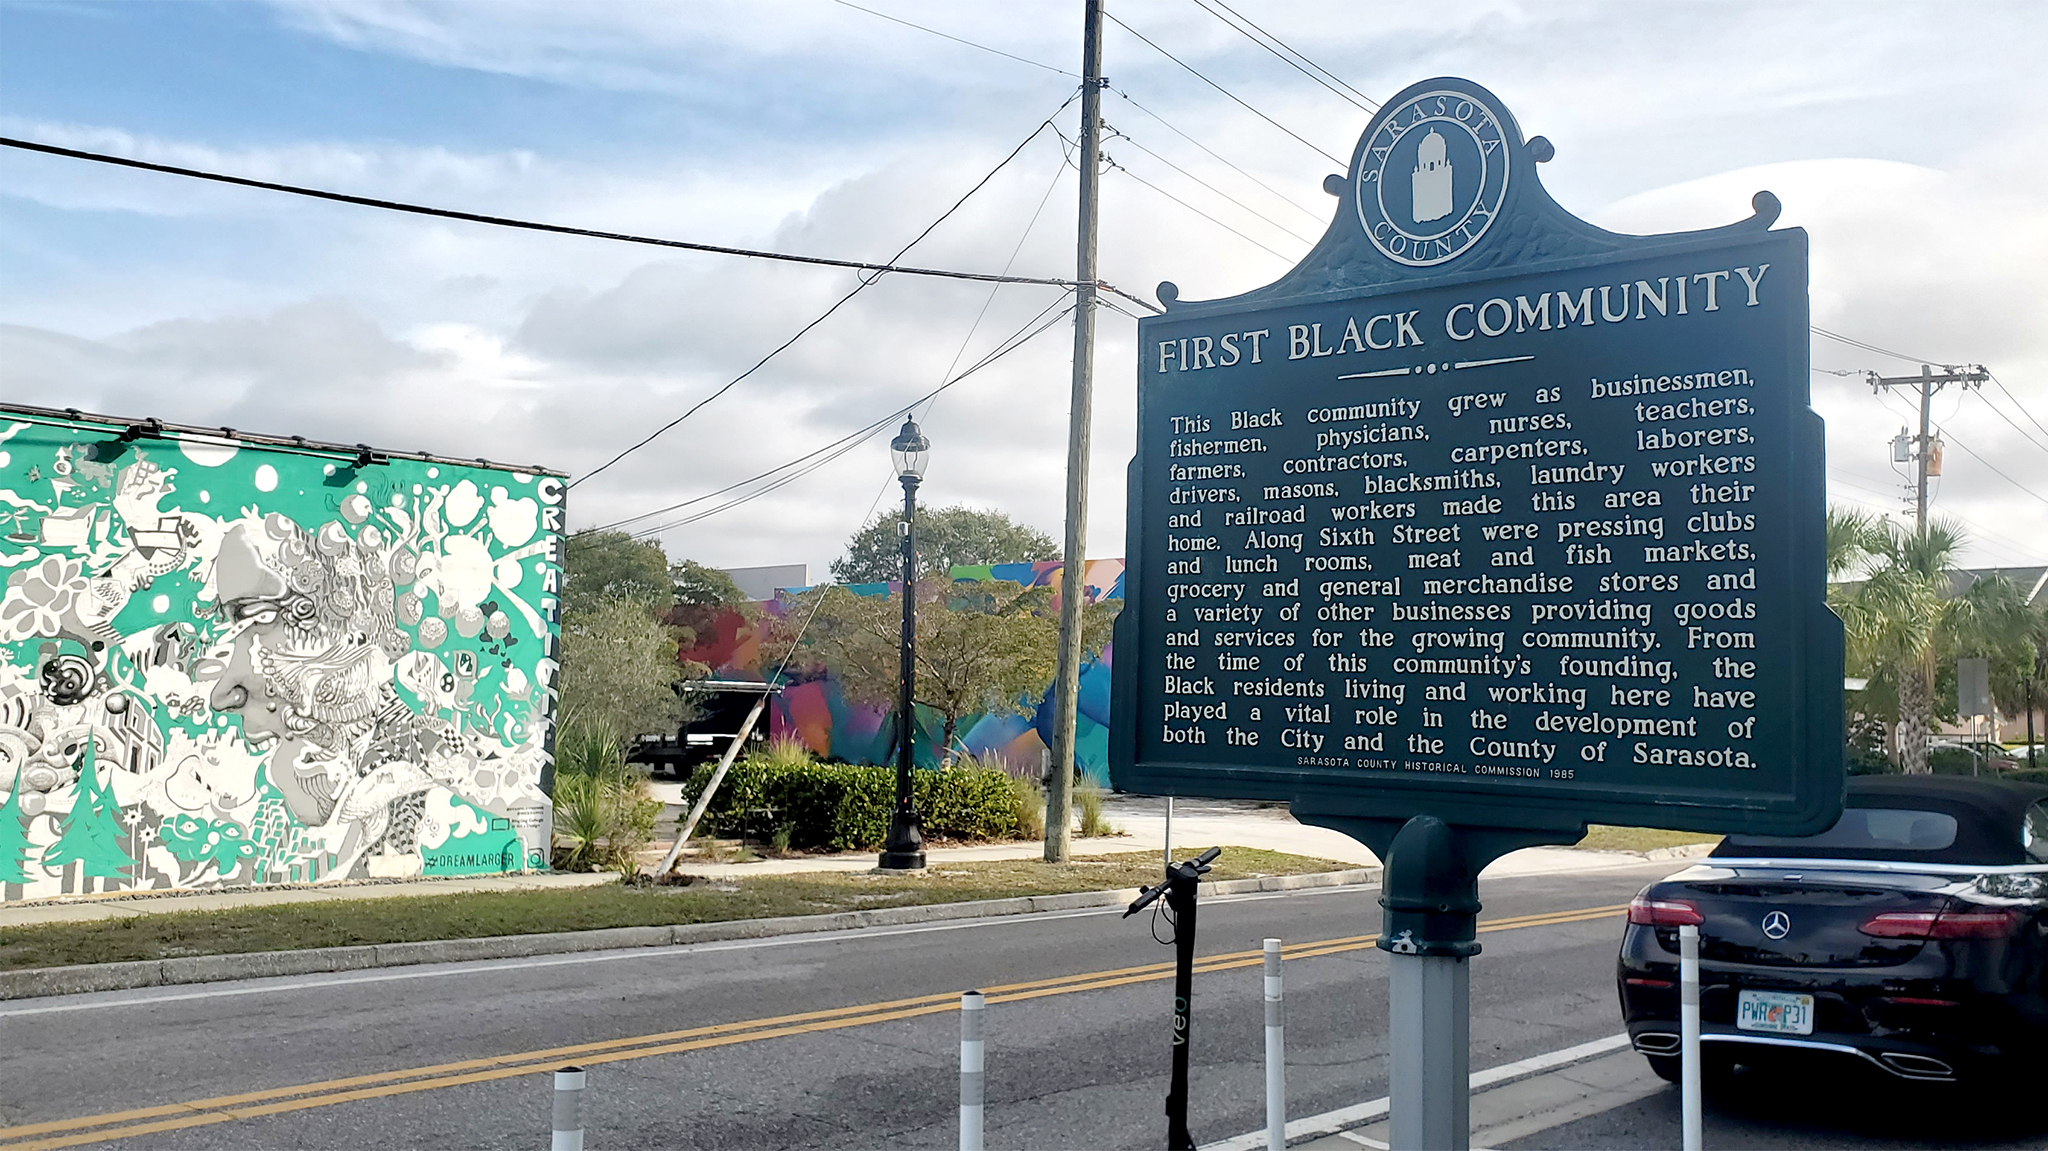 A black plaque with gold lettering titled “First Black Community” that reads “This Black community grew as businessmen, fishermen, physicians, nurses, teachers, farmers, contractors carpenters, laborers, drivers, masons, blacksmiths, laundry workers and railroad workers made this area their home. Along Sixth Street were pressing clubs and lunch rooms, meat and fish markets, grocery and general merchandise stores and a variety of other businesses providing goods and services for the growing community. From the time of this community’s founding, the Black residents living and working here played a vital role in the development of both the City and the County of Sarasota.”